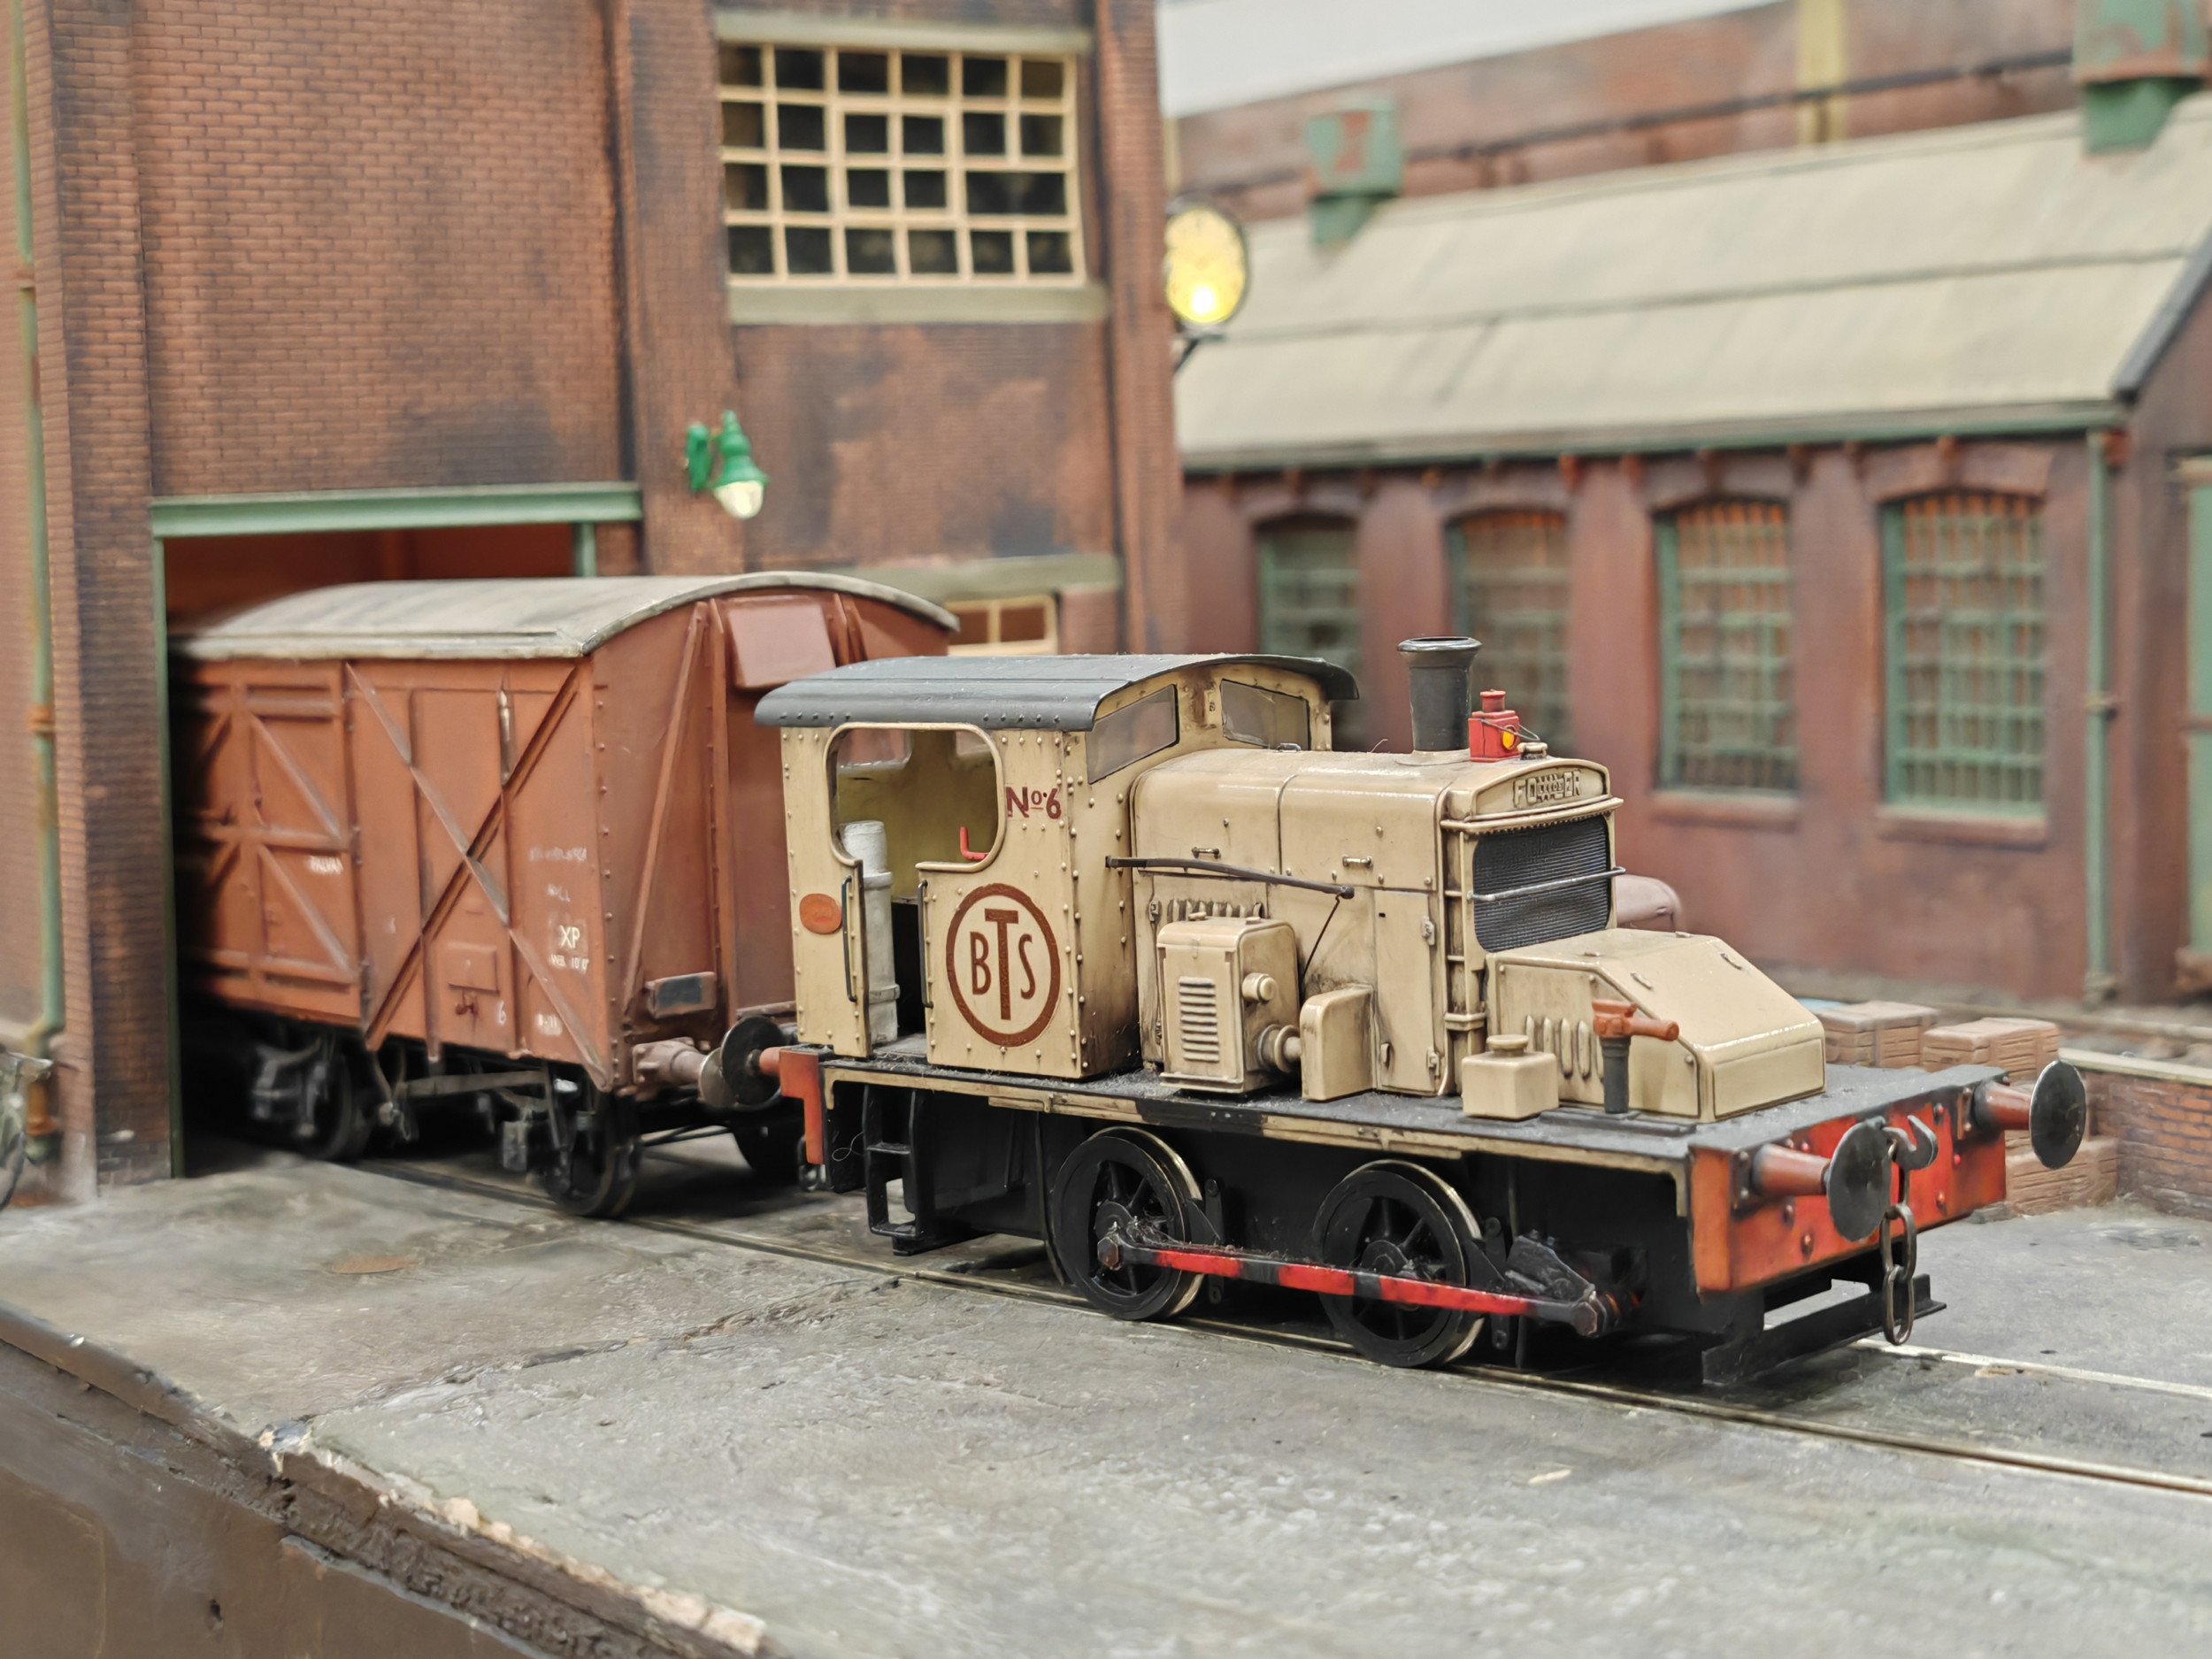 Burn Thorn and Sons is a busy 'O' gauge shunting scene displayed by Joshua Haworth at Model World LIVE.